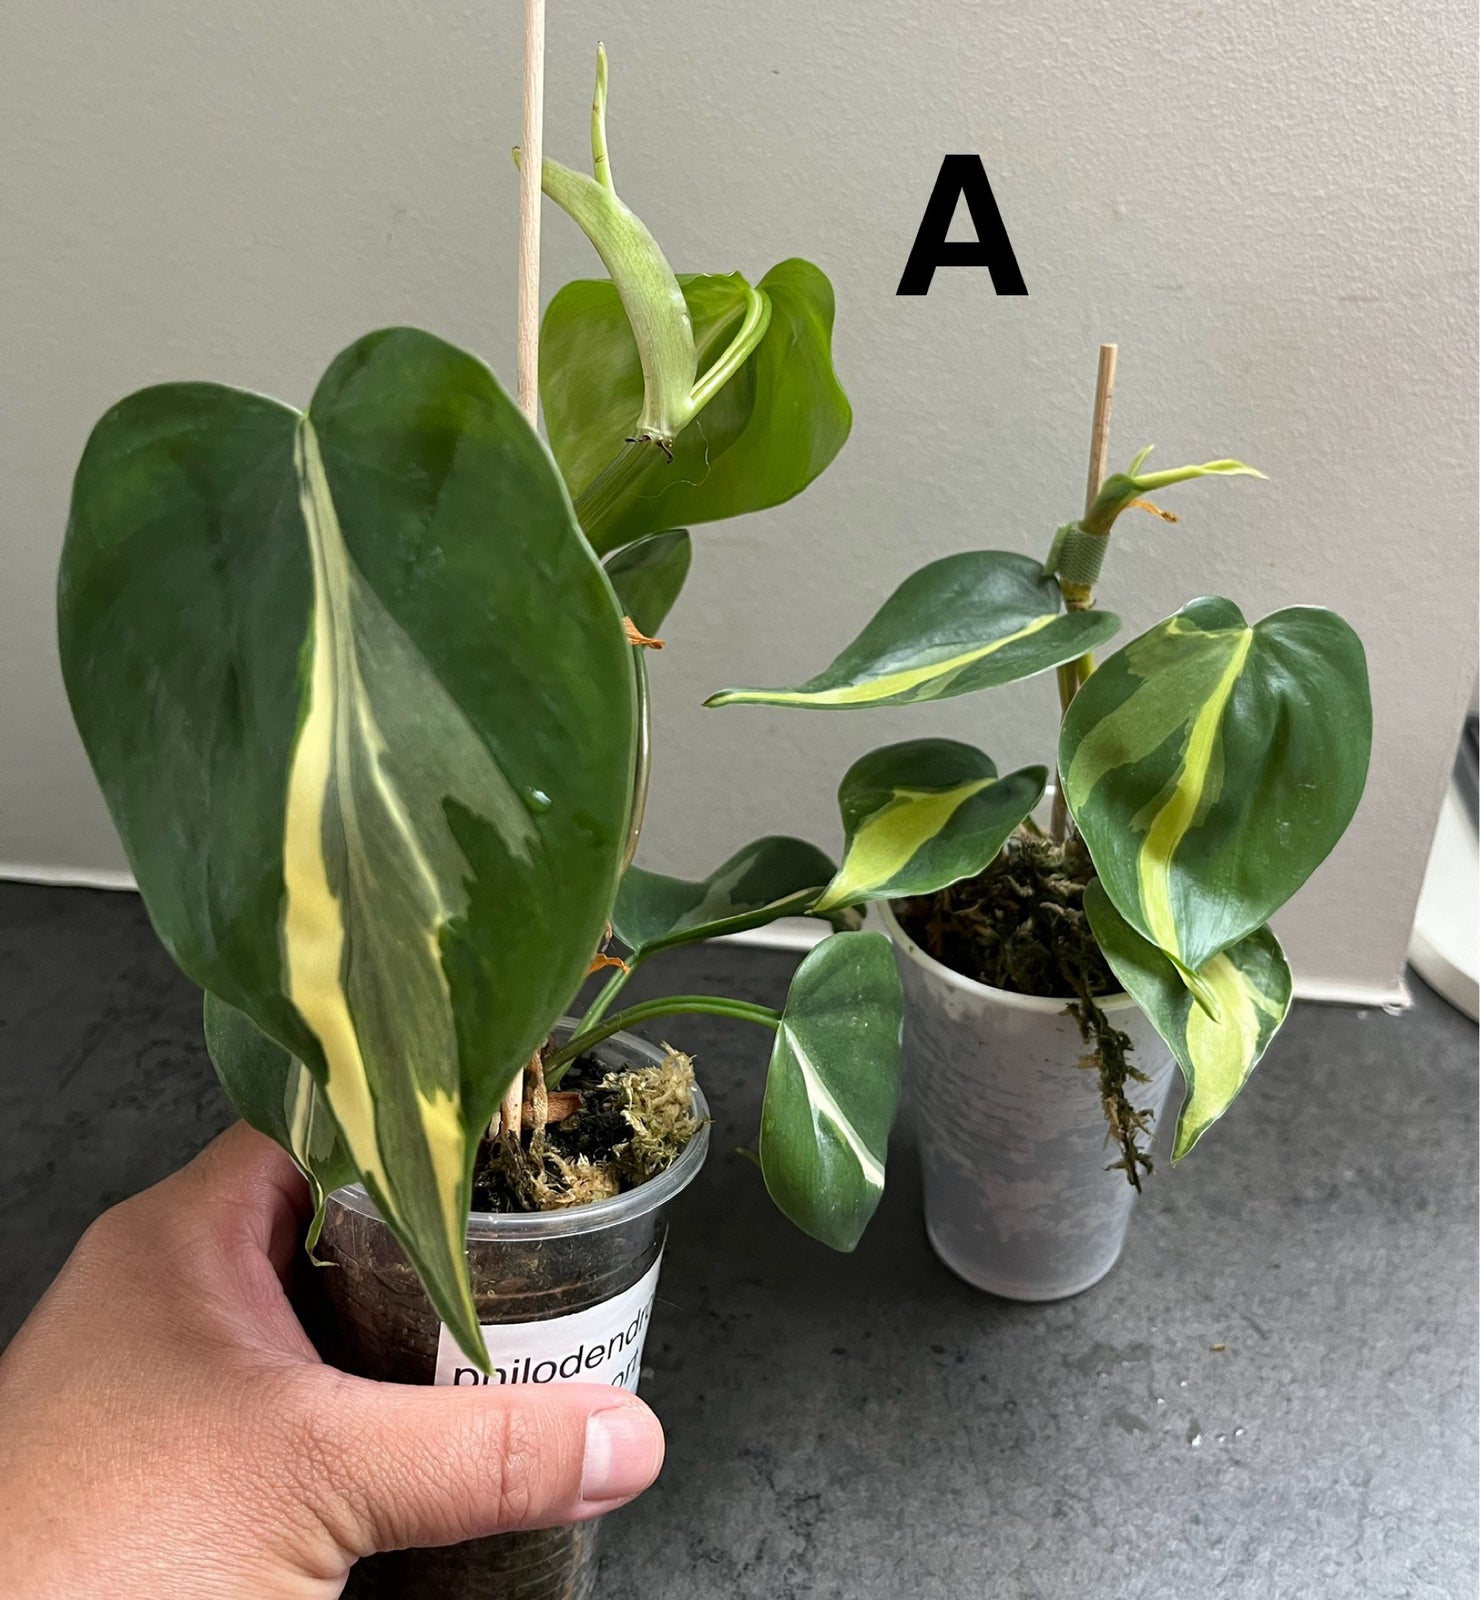 Stueplante, Philodendron